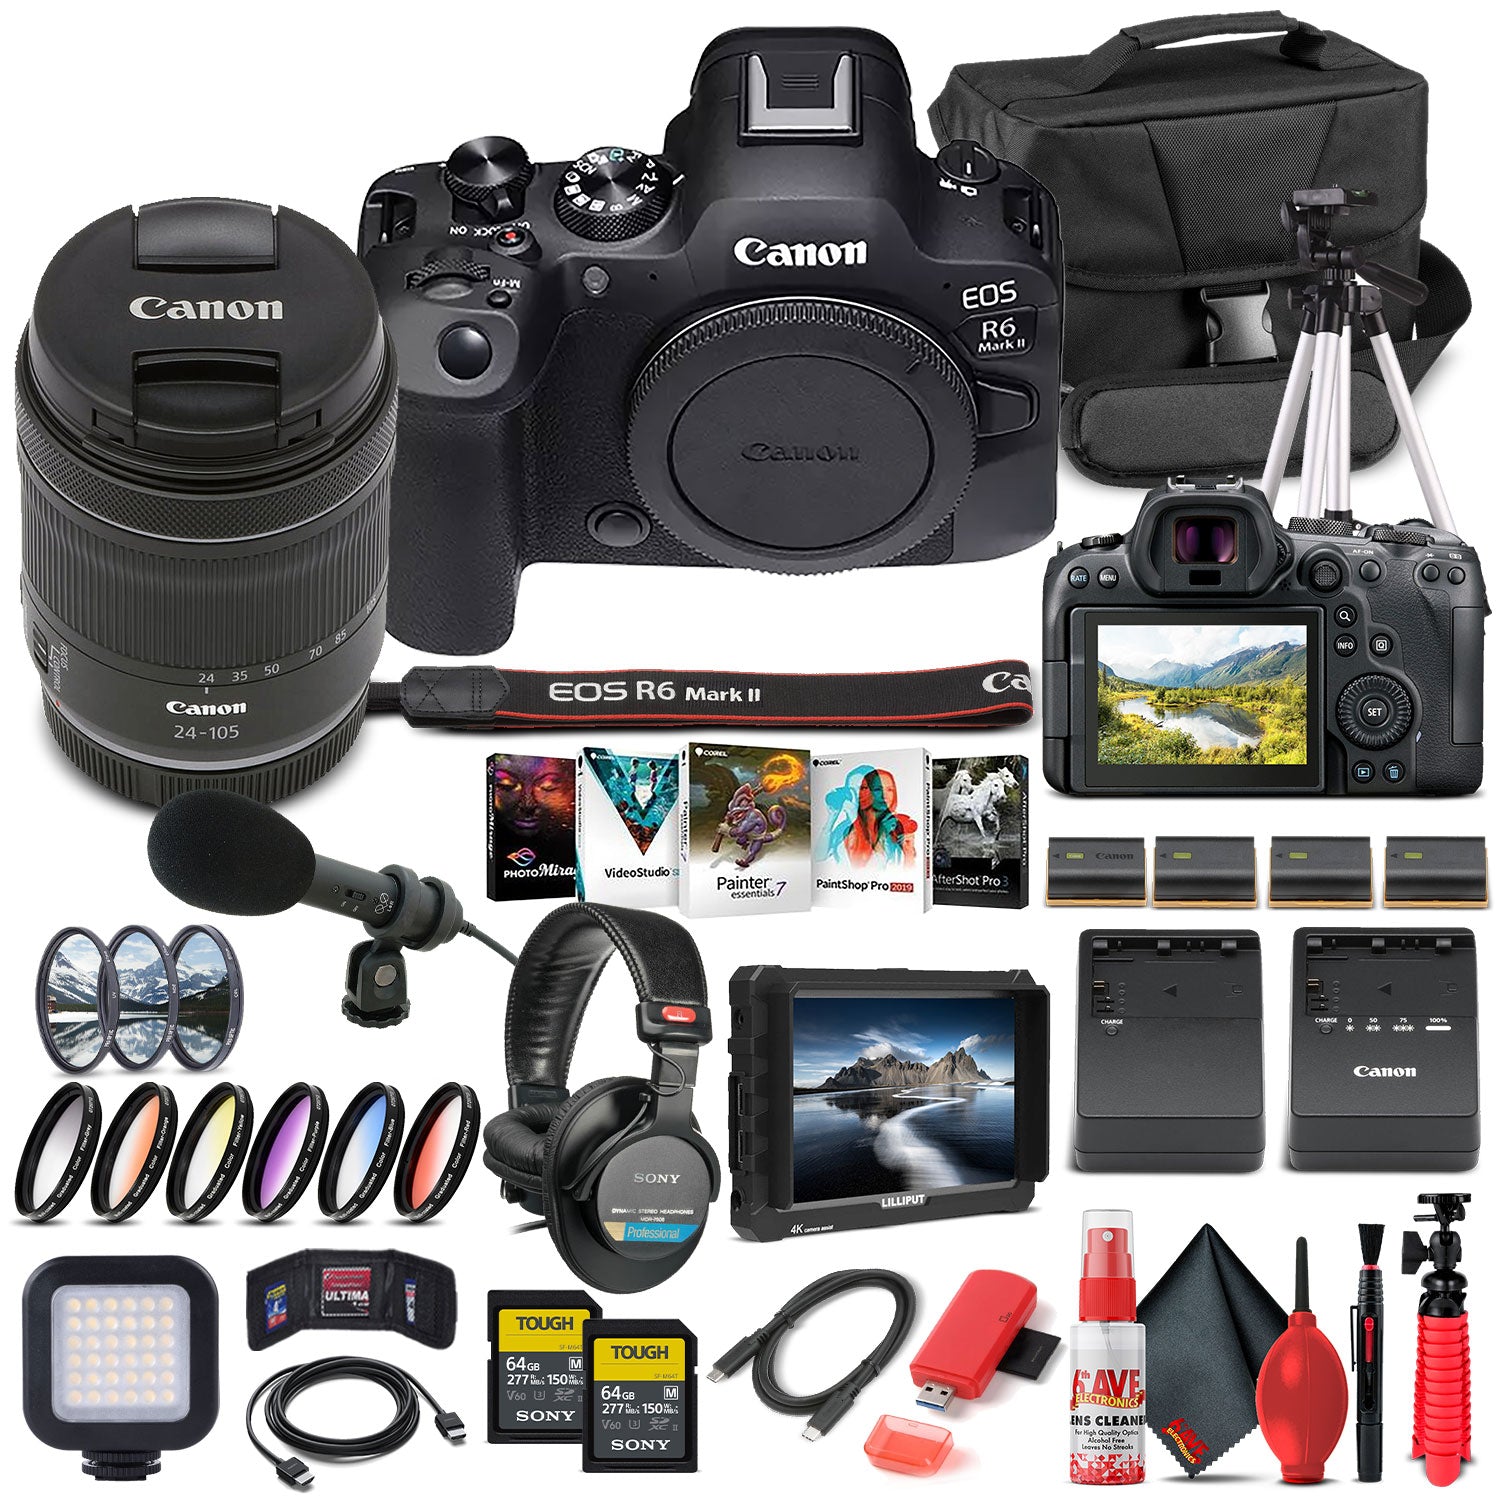 Canon EOS R6 Mark II Mirrorless Camera with 24-105mm f/4-7.1 Lens 5666C018 - Pro Bundle